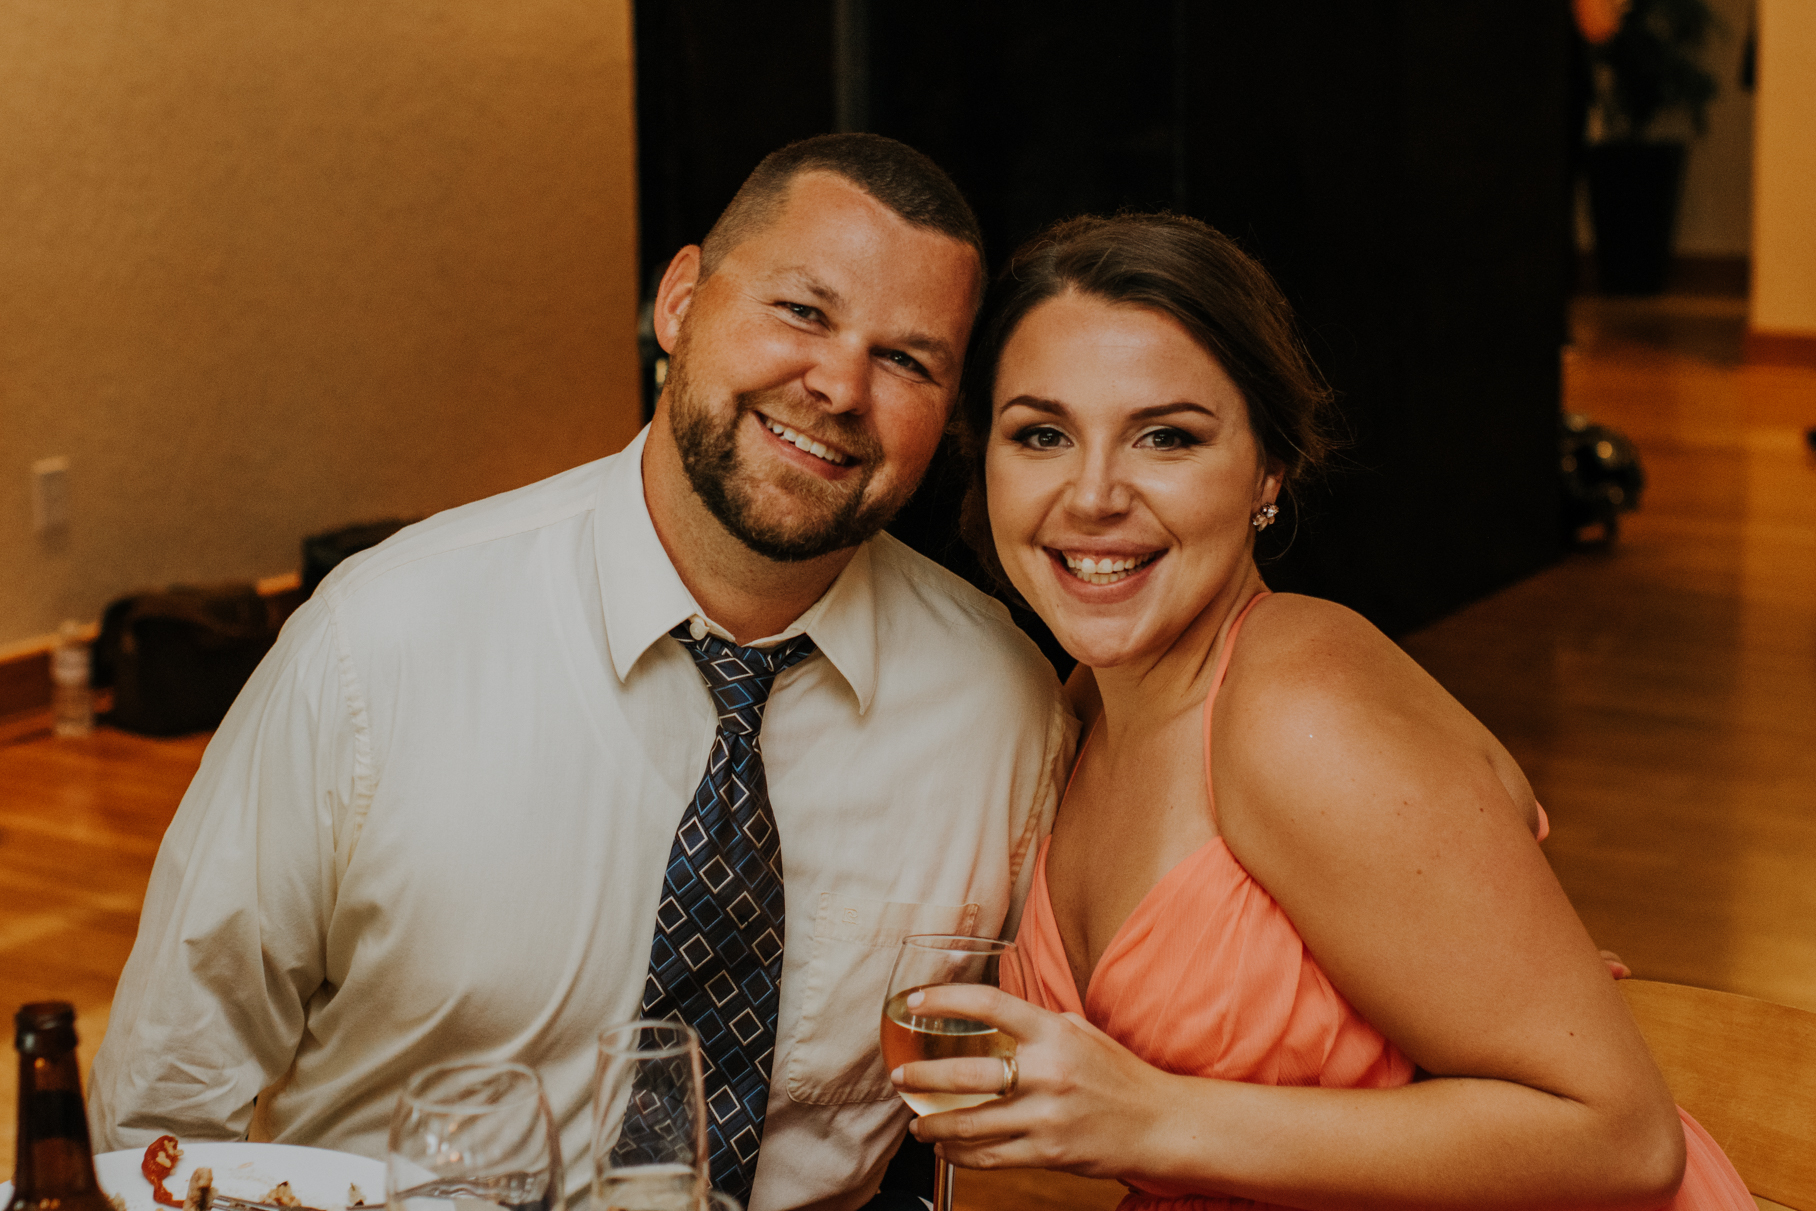 fort desoto wedding | tampa wedding photography | freehearted film co